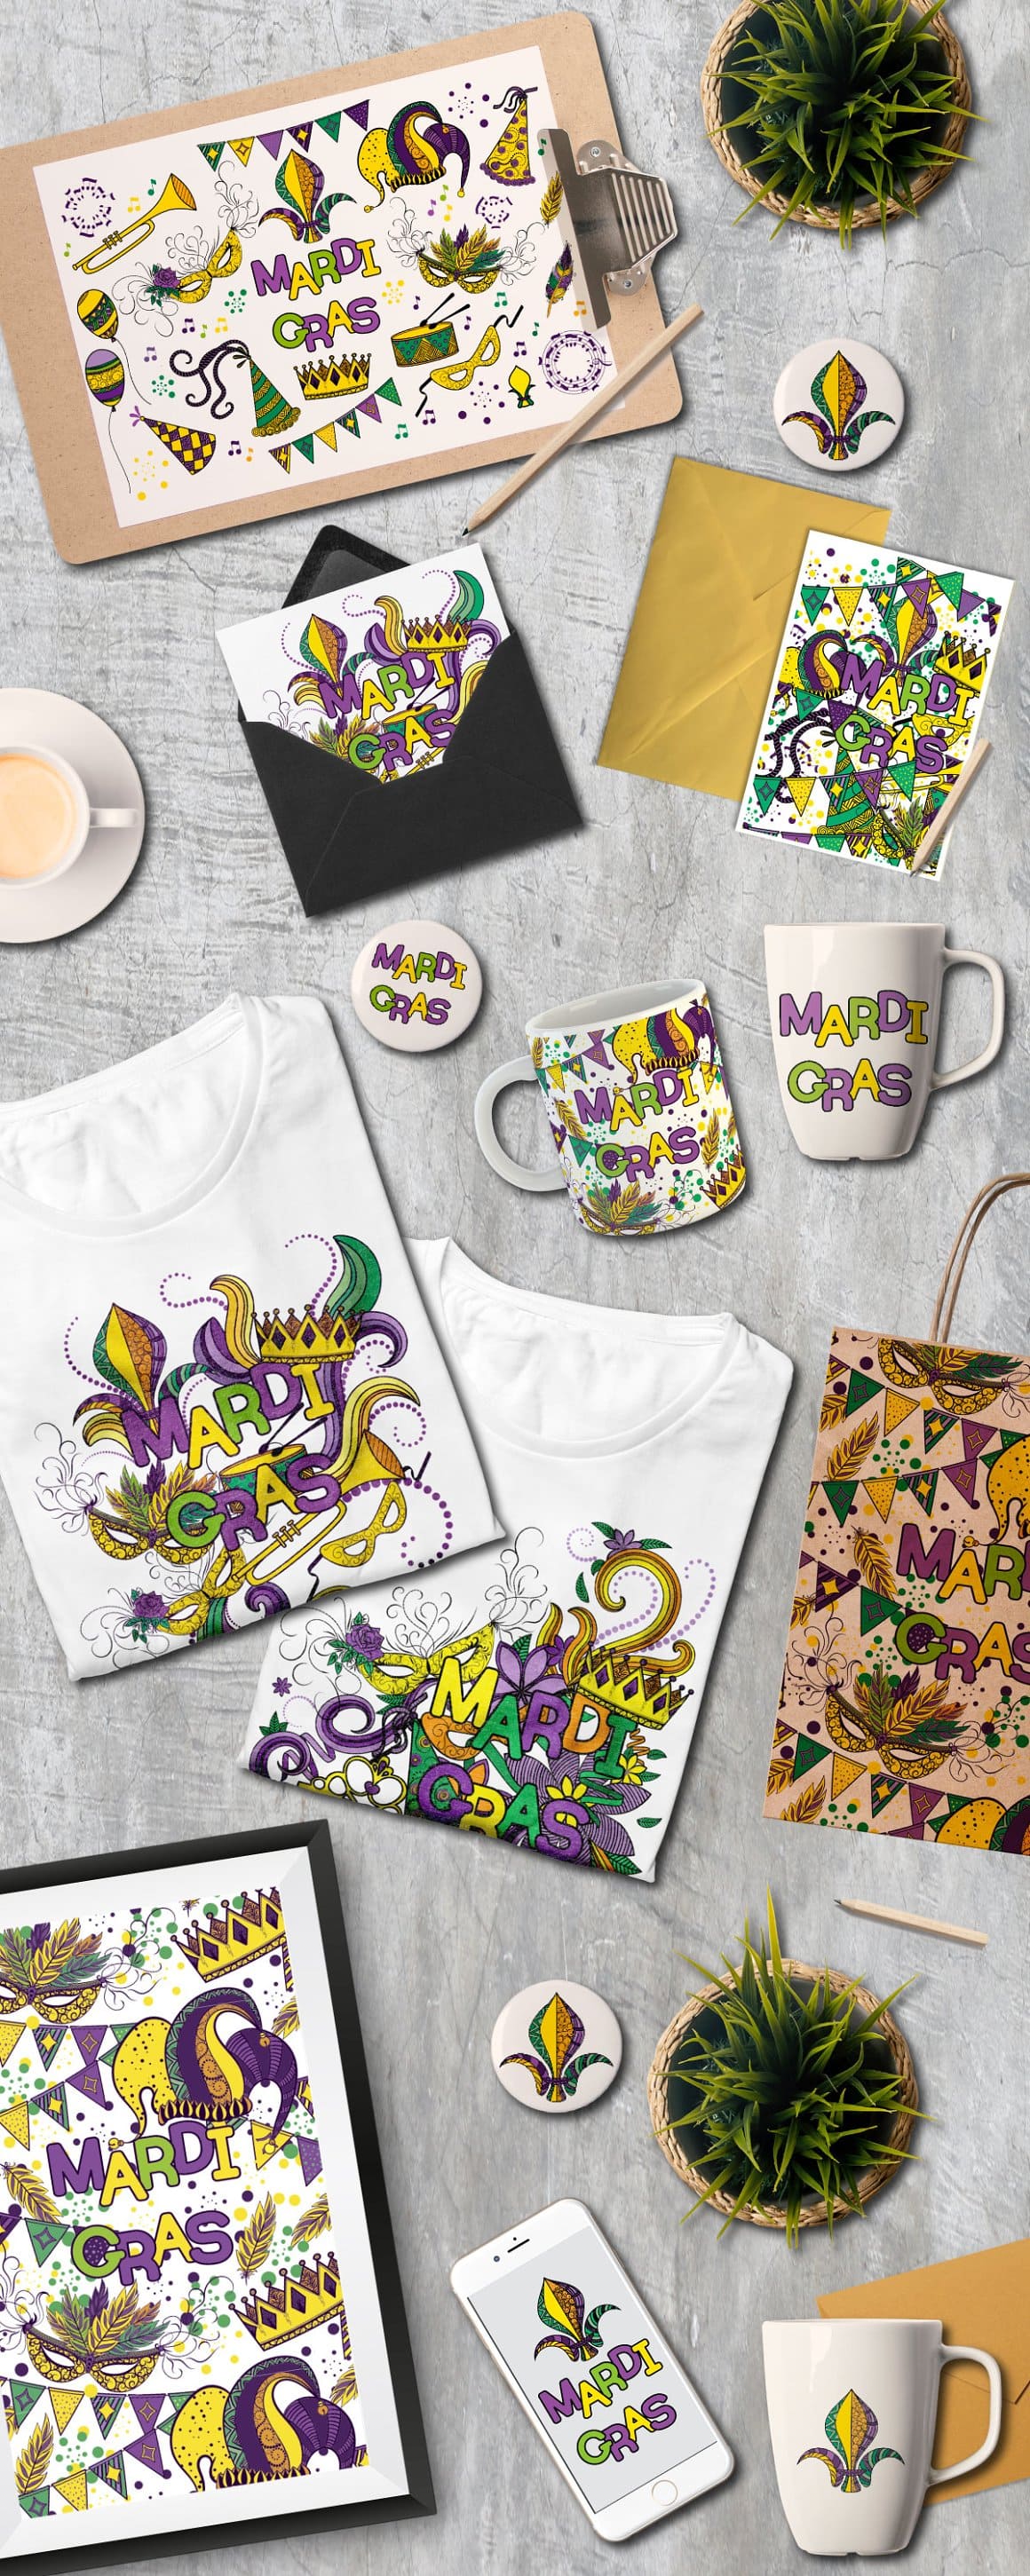 Crowns, carnival masks and other symbols of Mardi Gras are painted on white T-shirts.